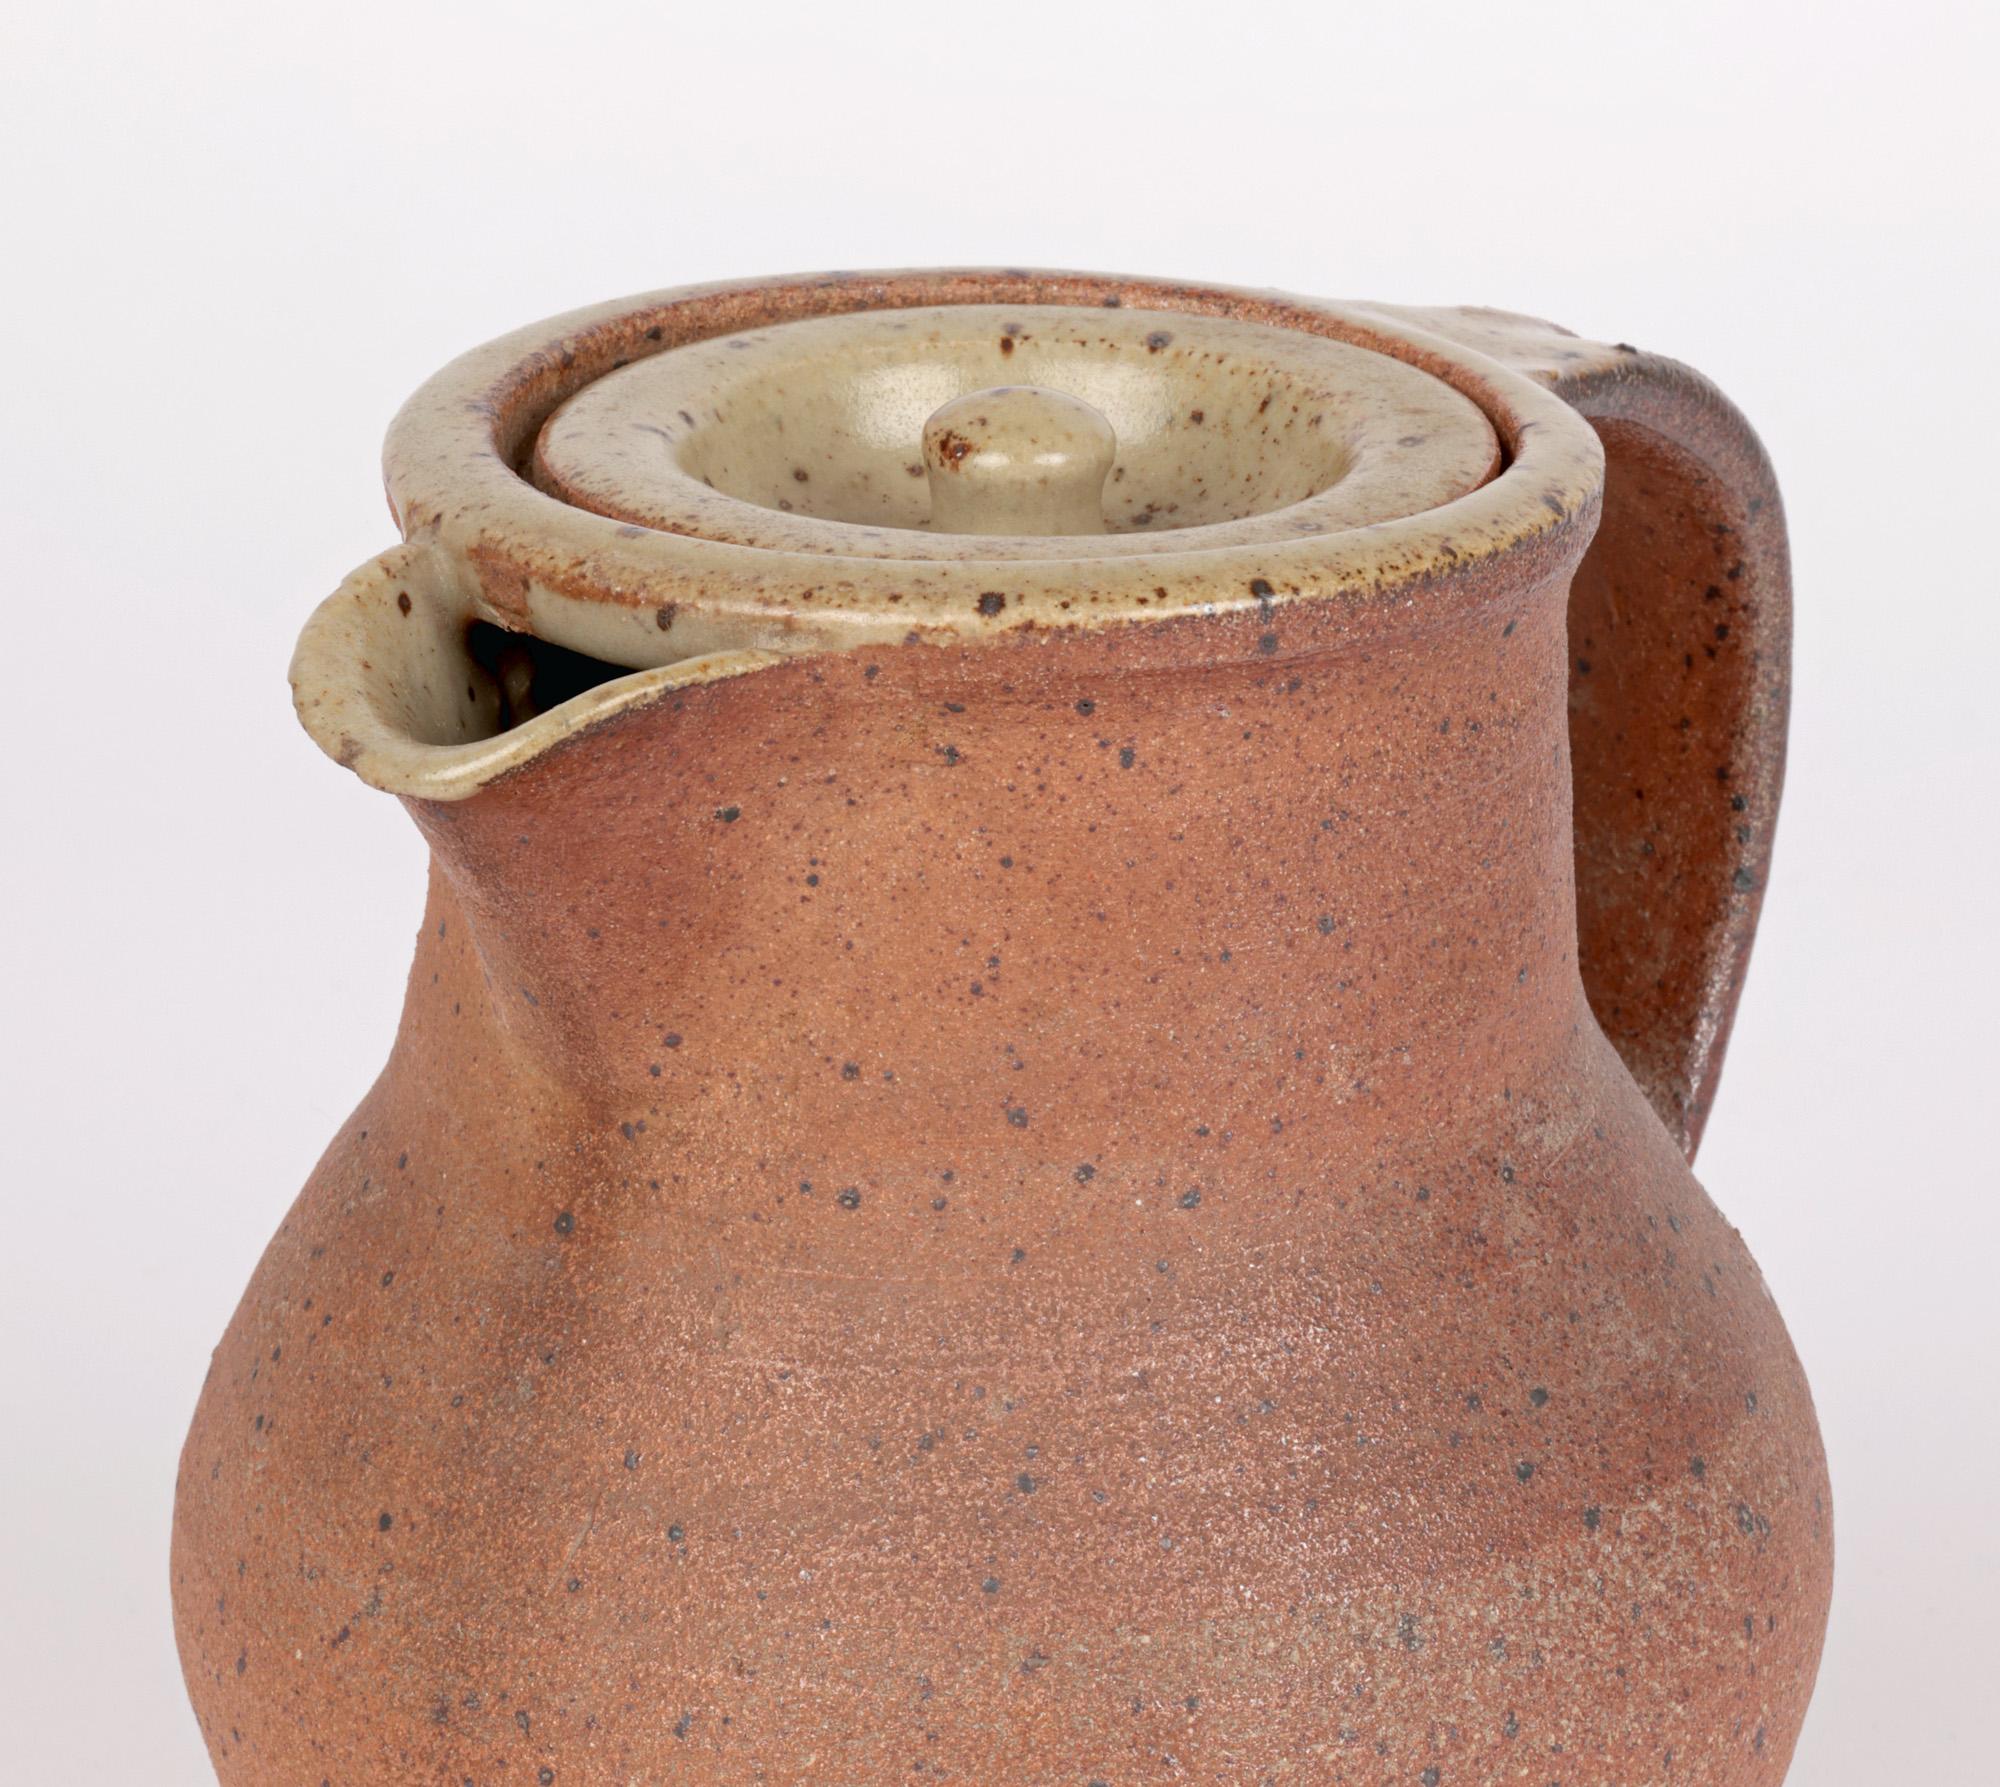 A stylish midcentury ash glazed handcrafted Studio Pottery coffee pot by renowned English potter Bernard Leach CBE (British, 1887-1979) and made at the Leach Pottery in St Ives, Cornwall. The stoneware vase pot stands on a flat narrow round base